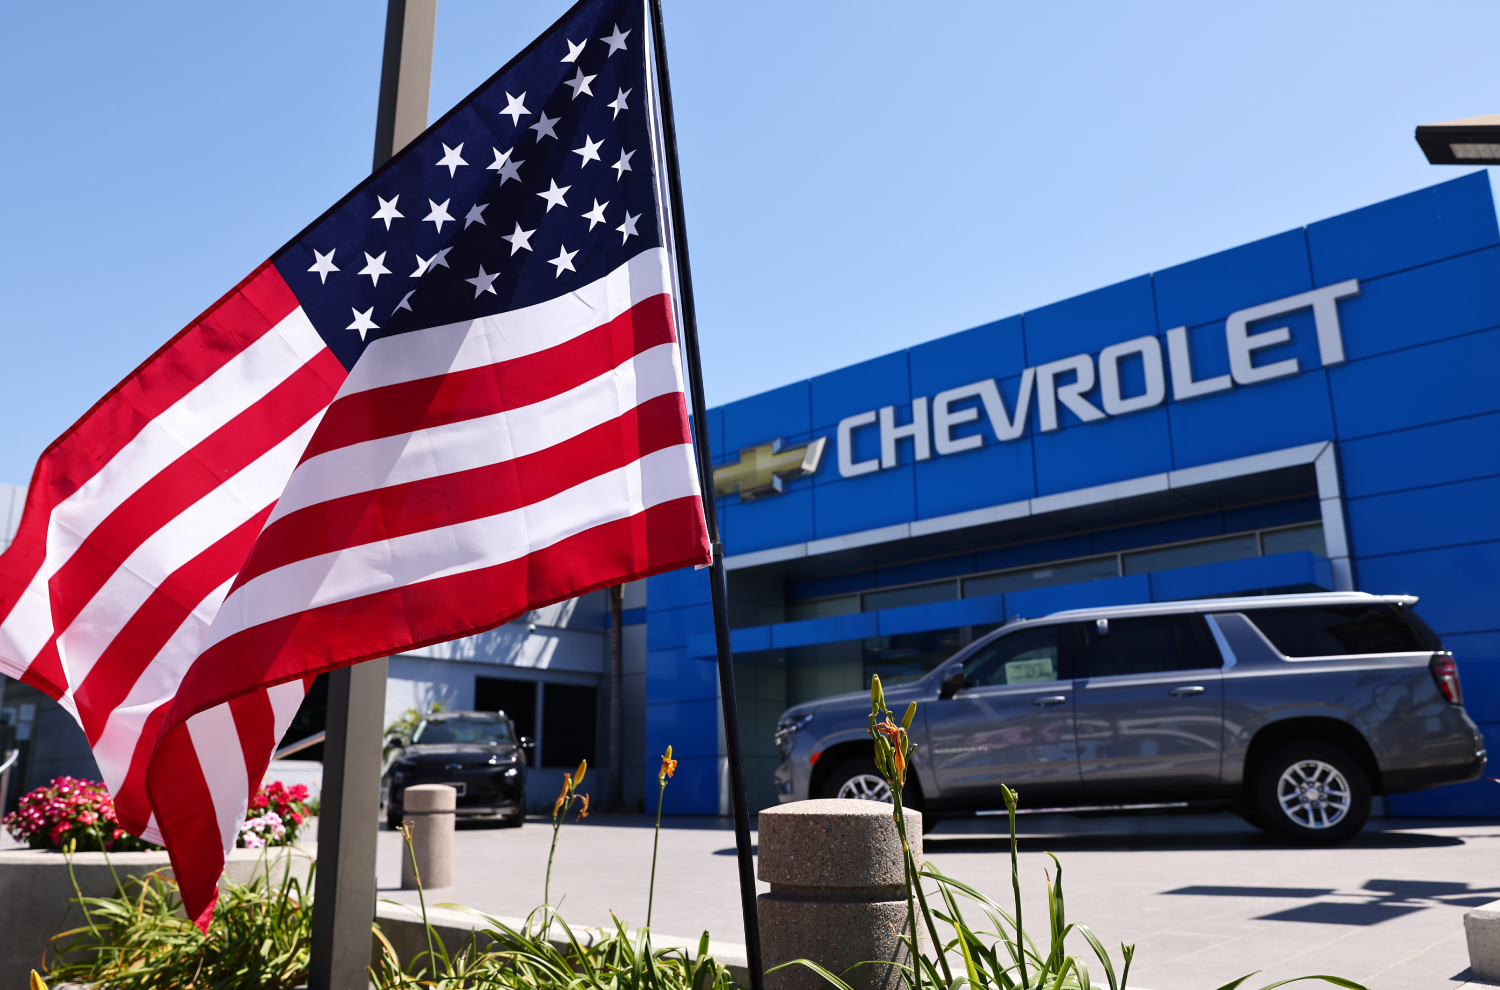 The history of General Motors acquisition of Chevrolet